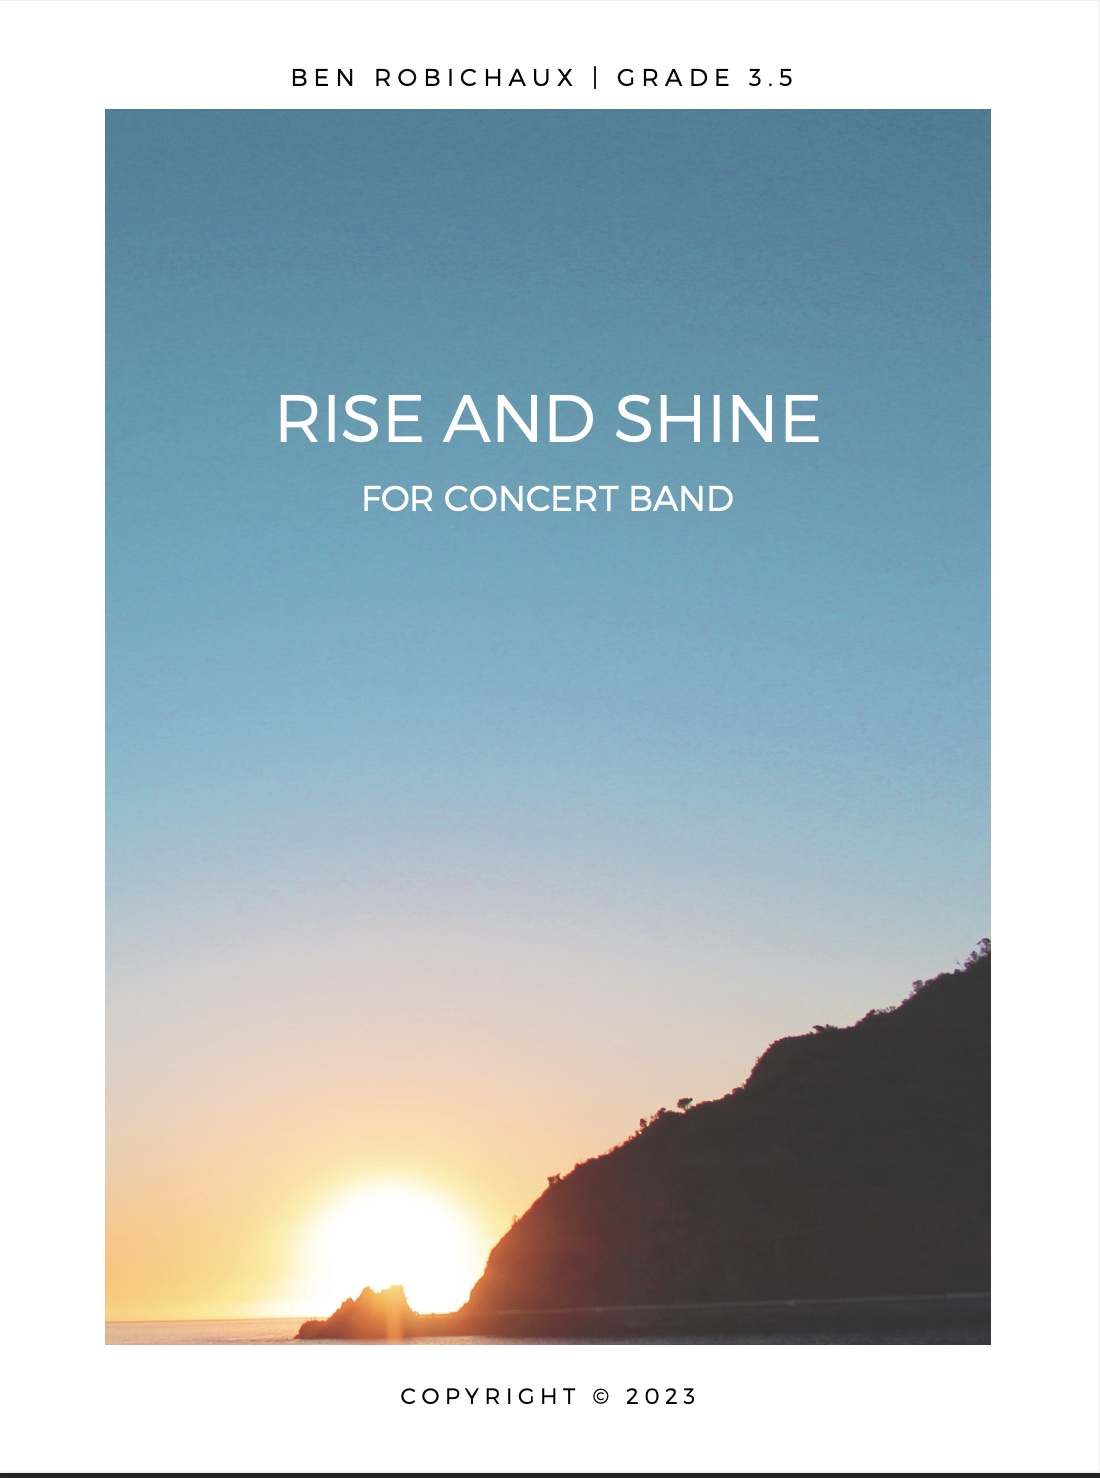 Rise And Shine (Score Only) by Ben Robichaux